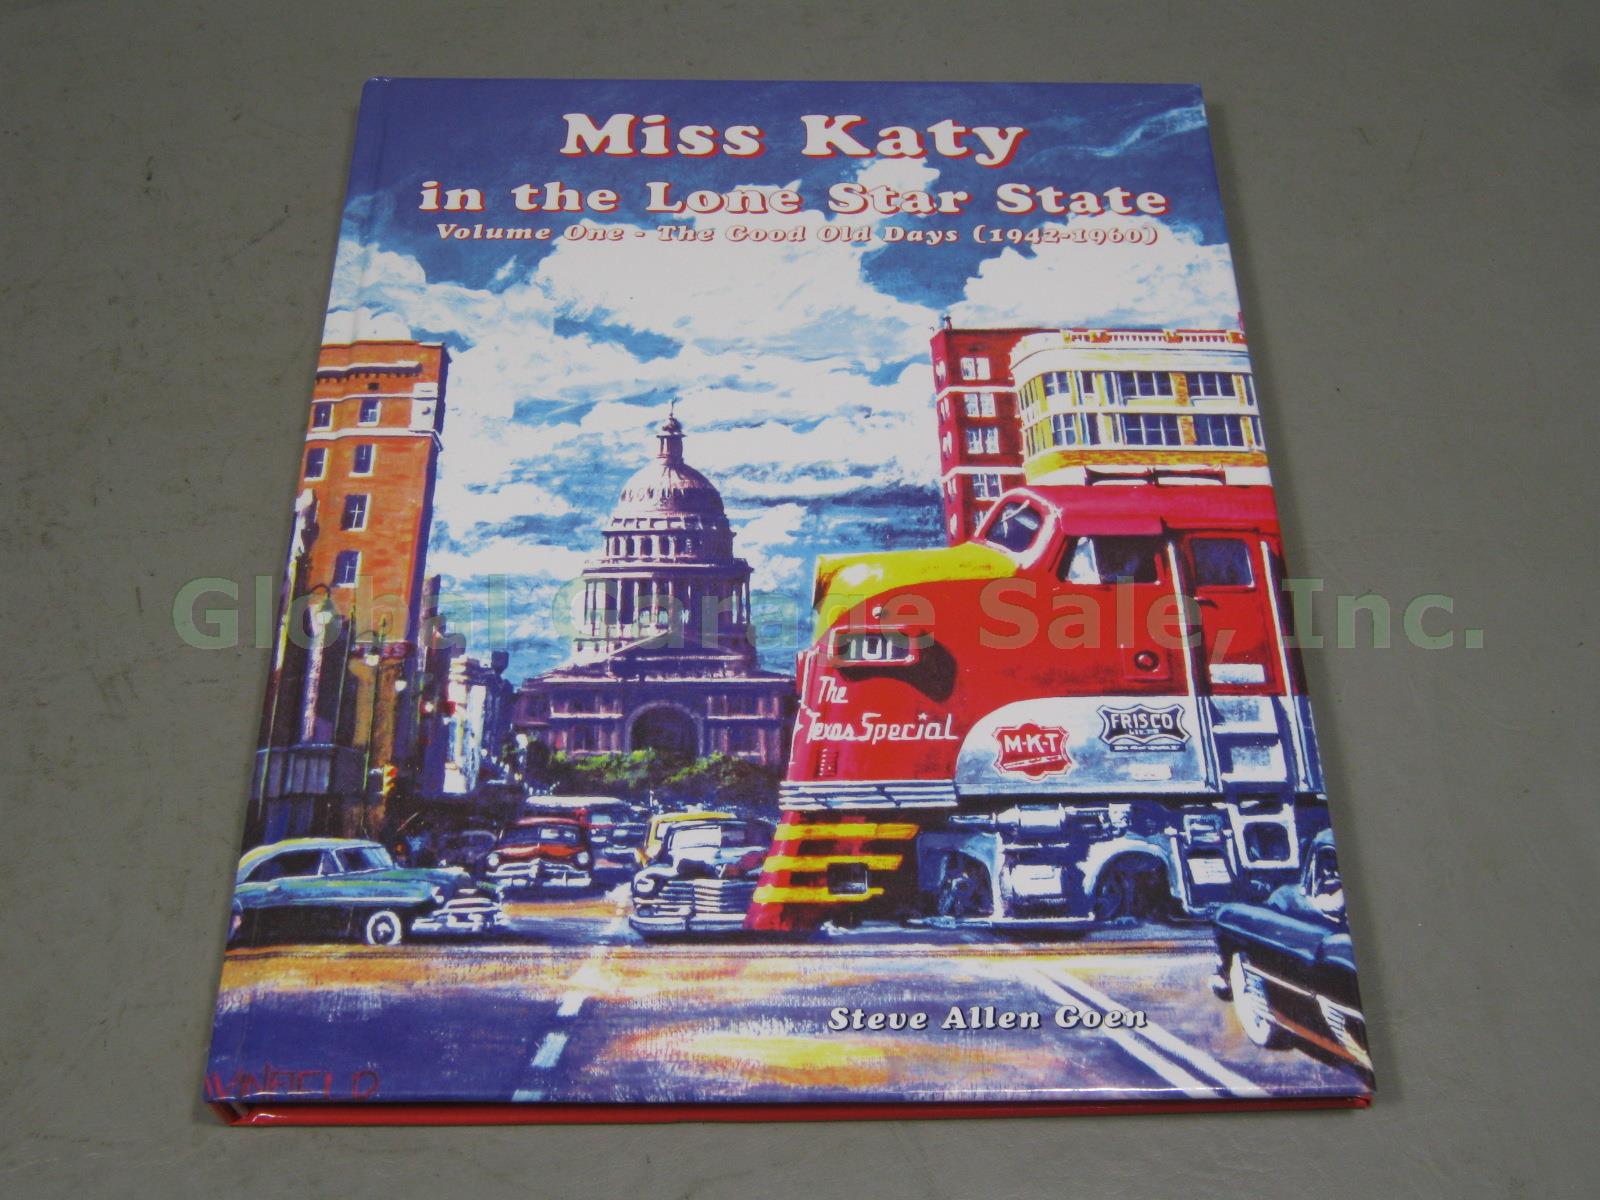 SIGNED Miss Katy In The Lone Star State Vol 1 Good Old Days Steve Allen Goen NR! 1